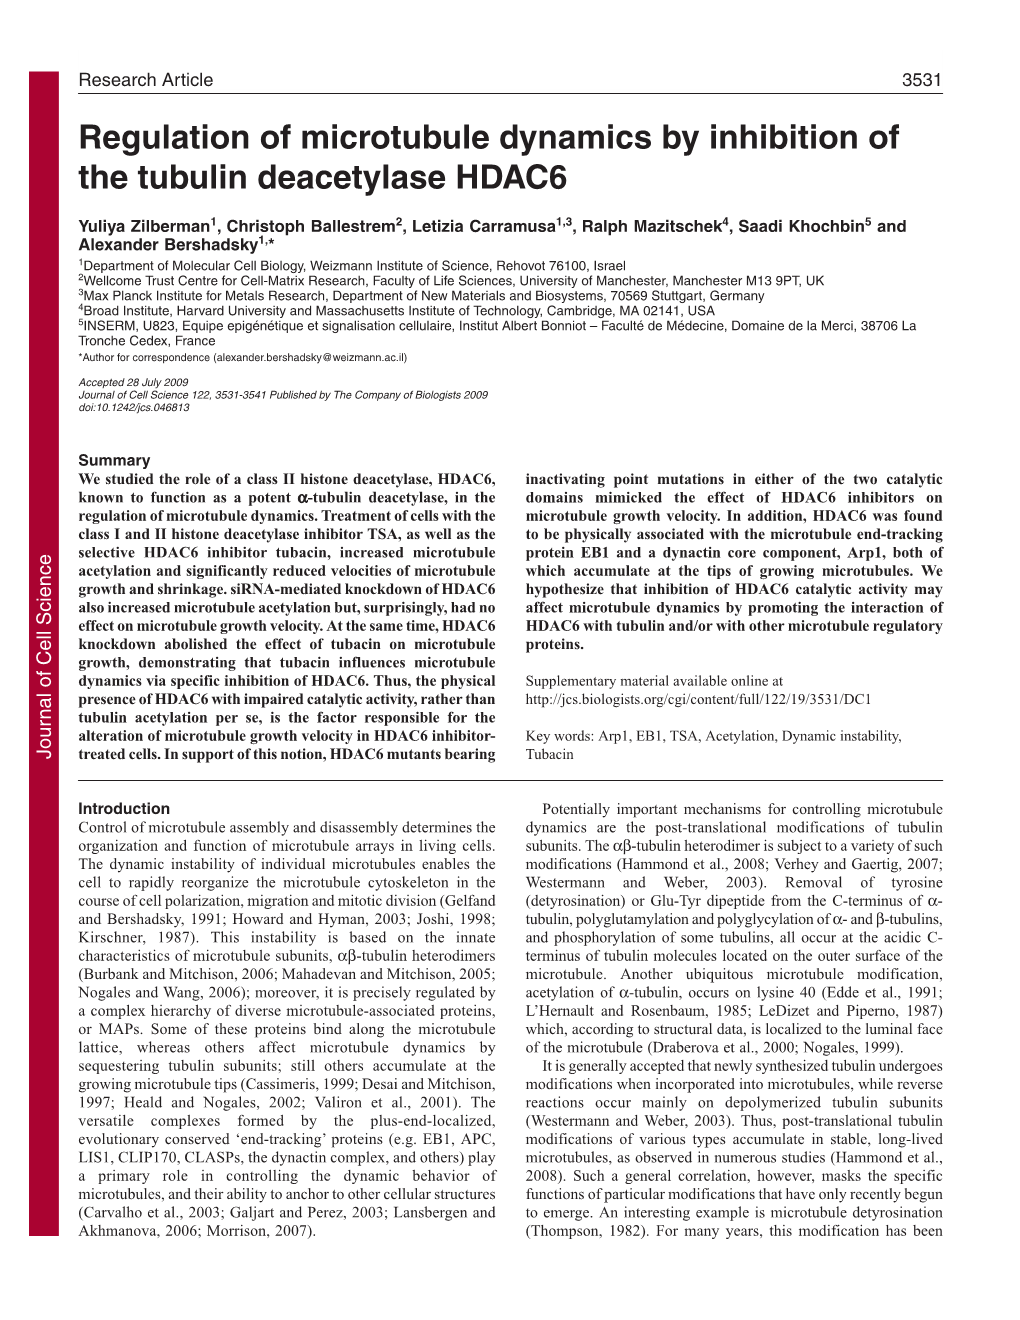 Regulation of Microtubule Dynamics by Inhibition of the Tubulin Deacetylase HDAC6